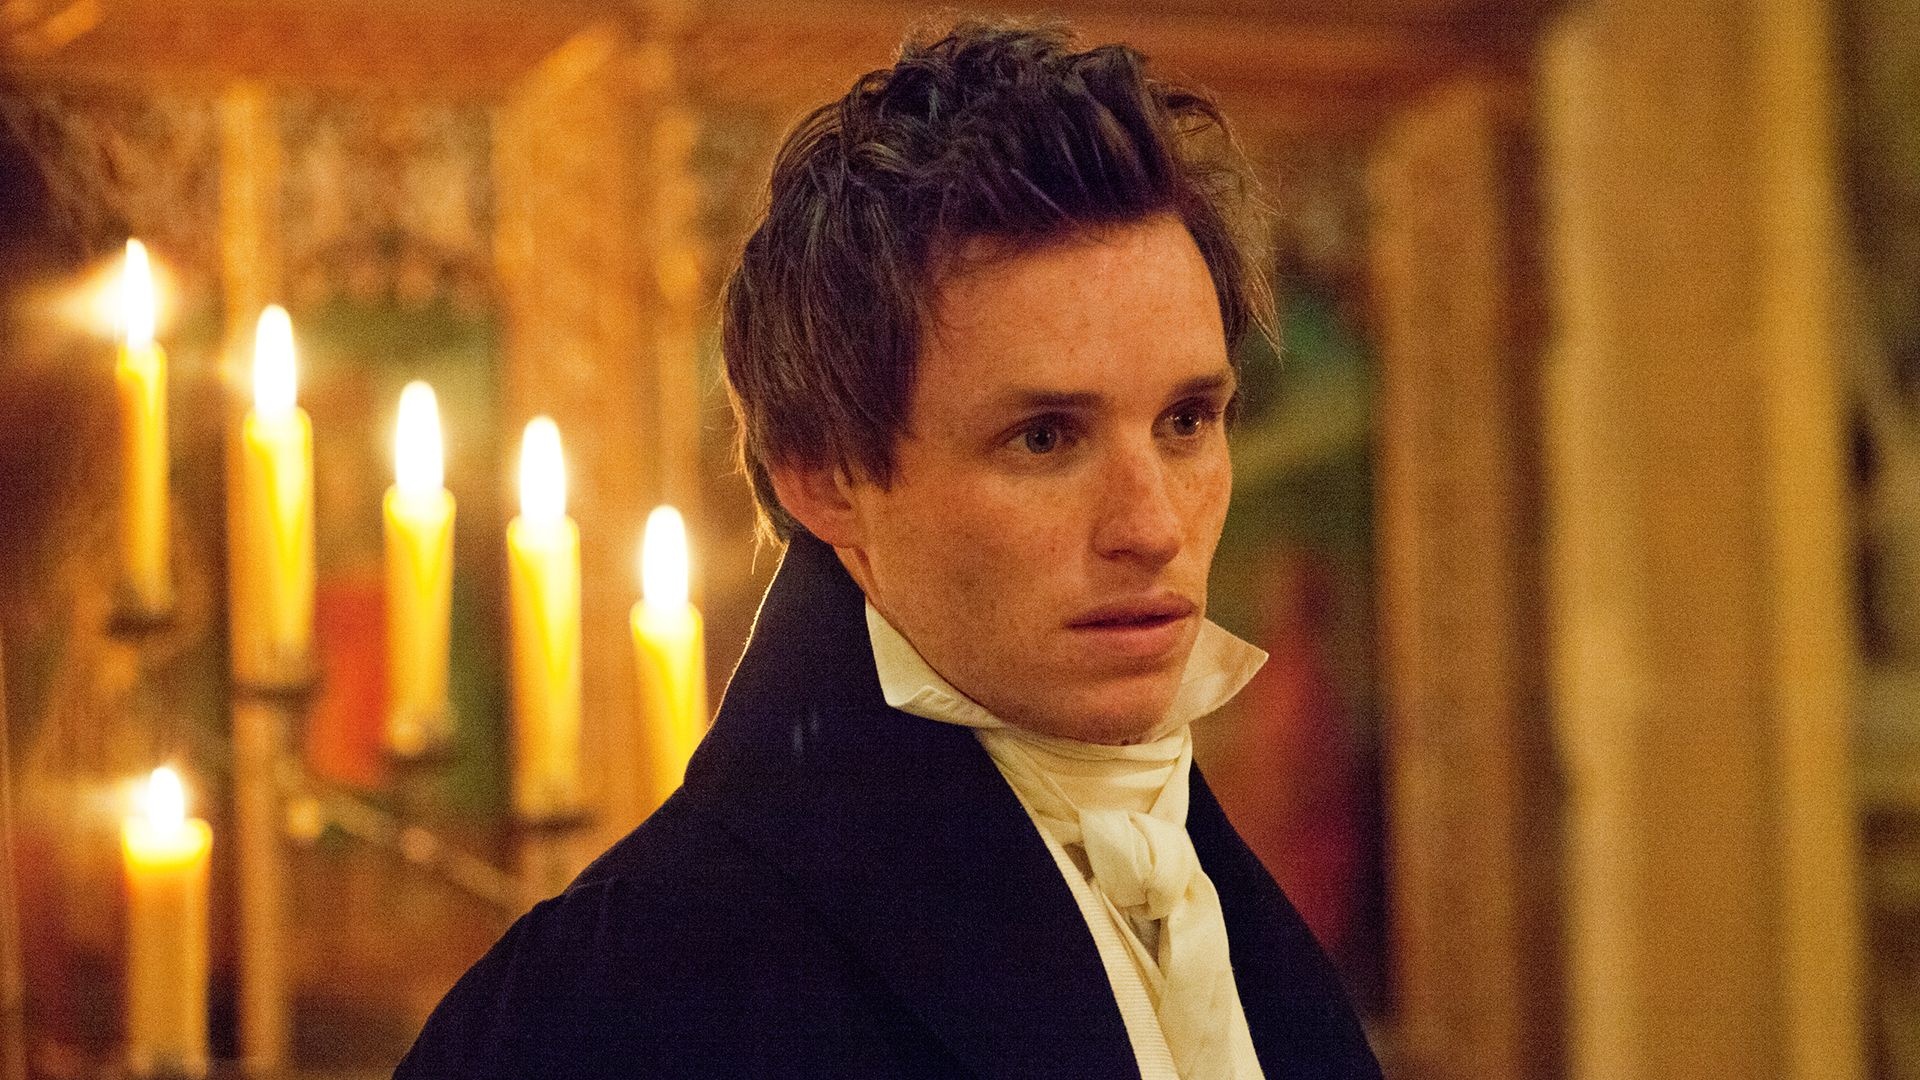 Les Miserables: Eddie Redmayne as Marius Pontmercy, a student revolutionary who falls in love with Cosette. 1920x1080 Full HD Background.